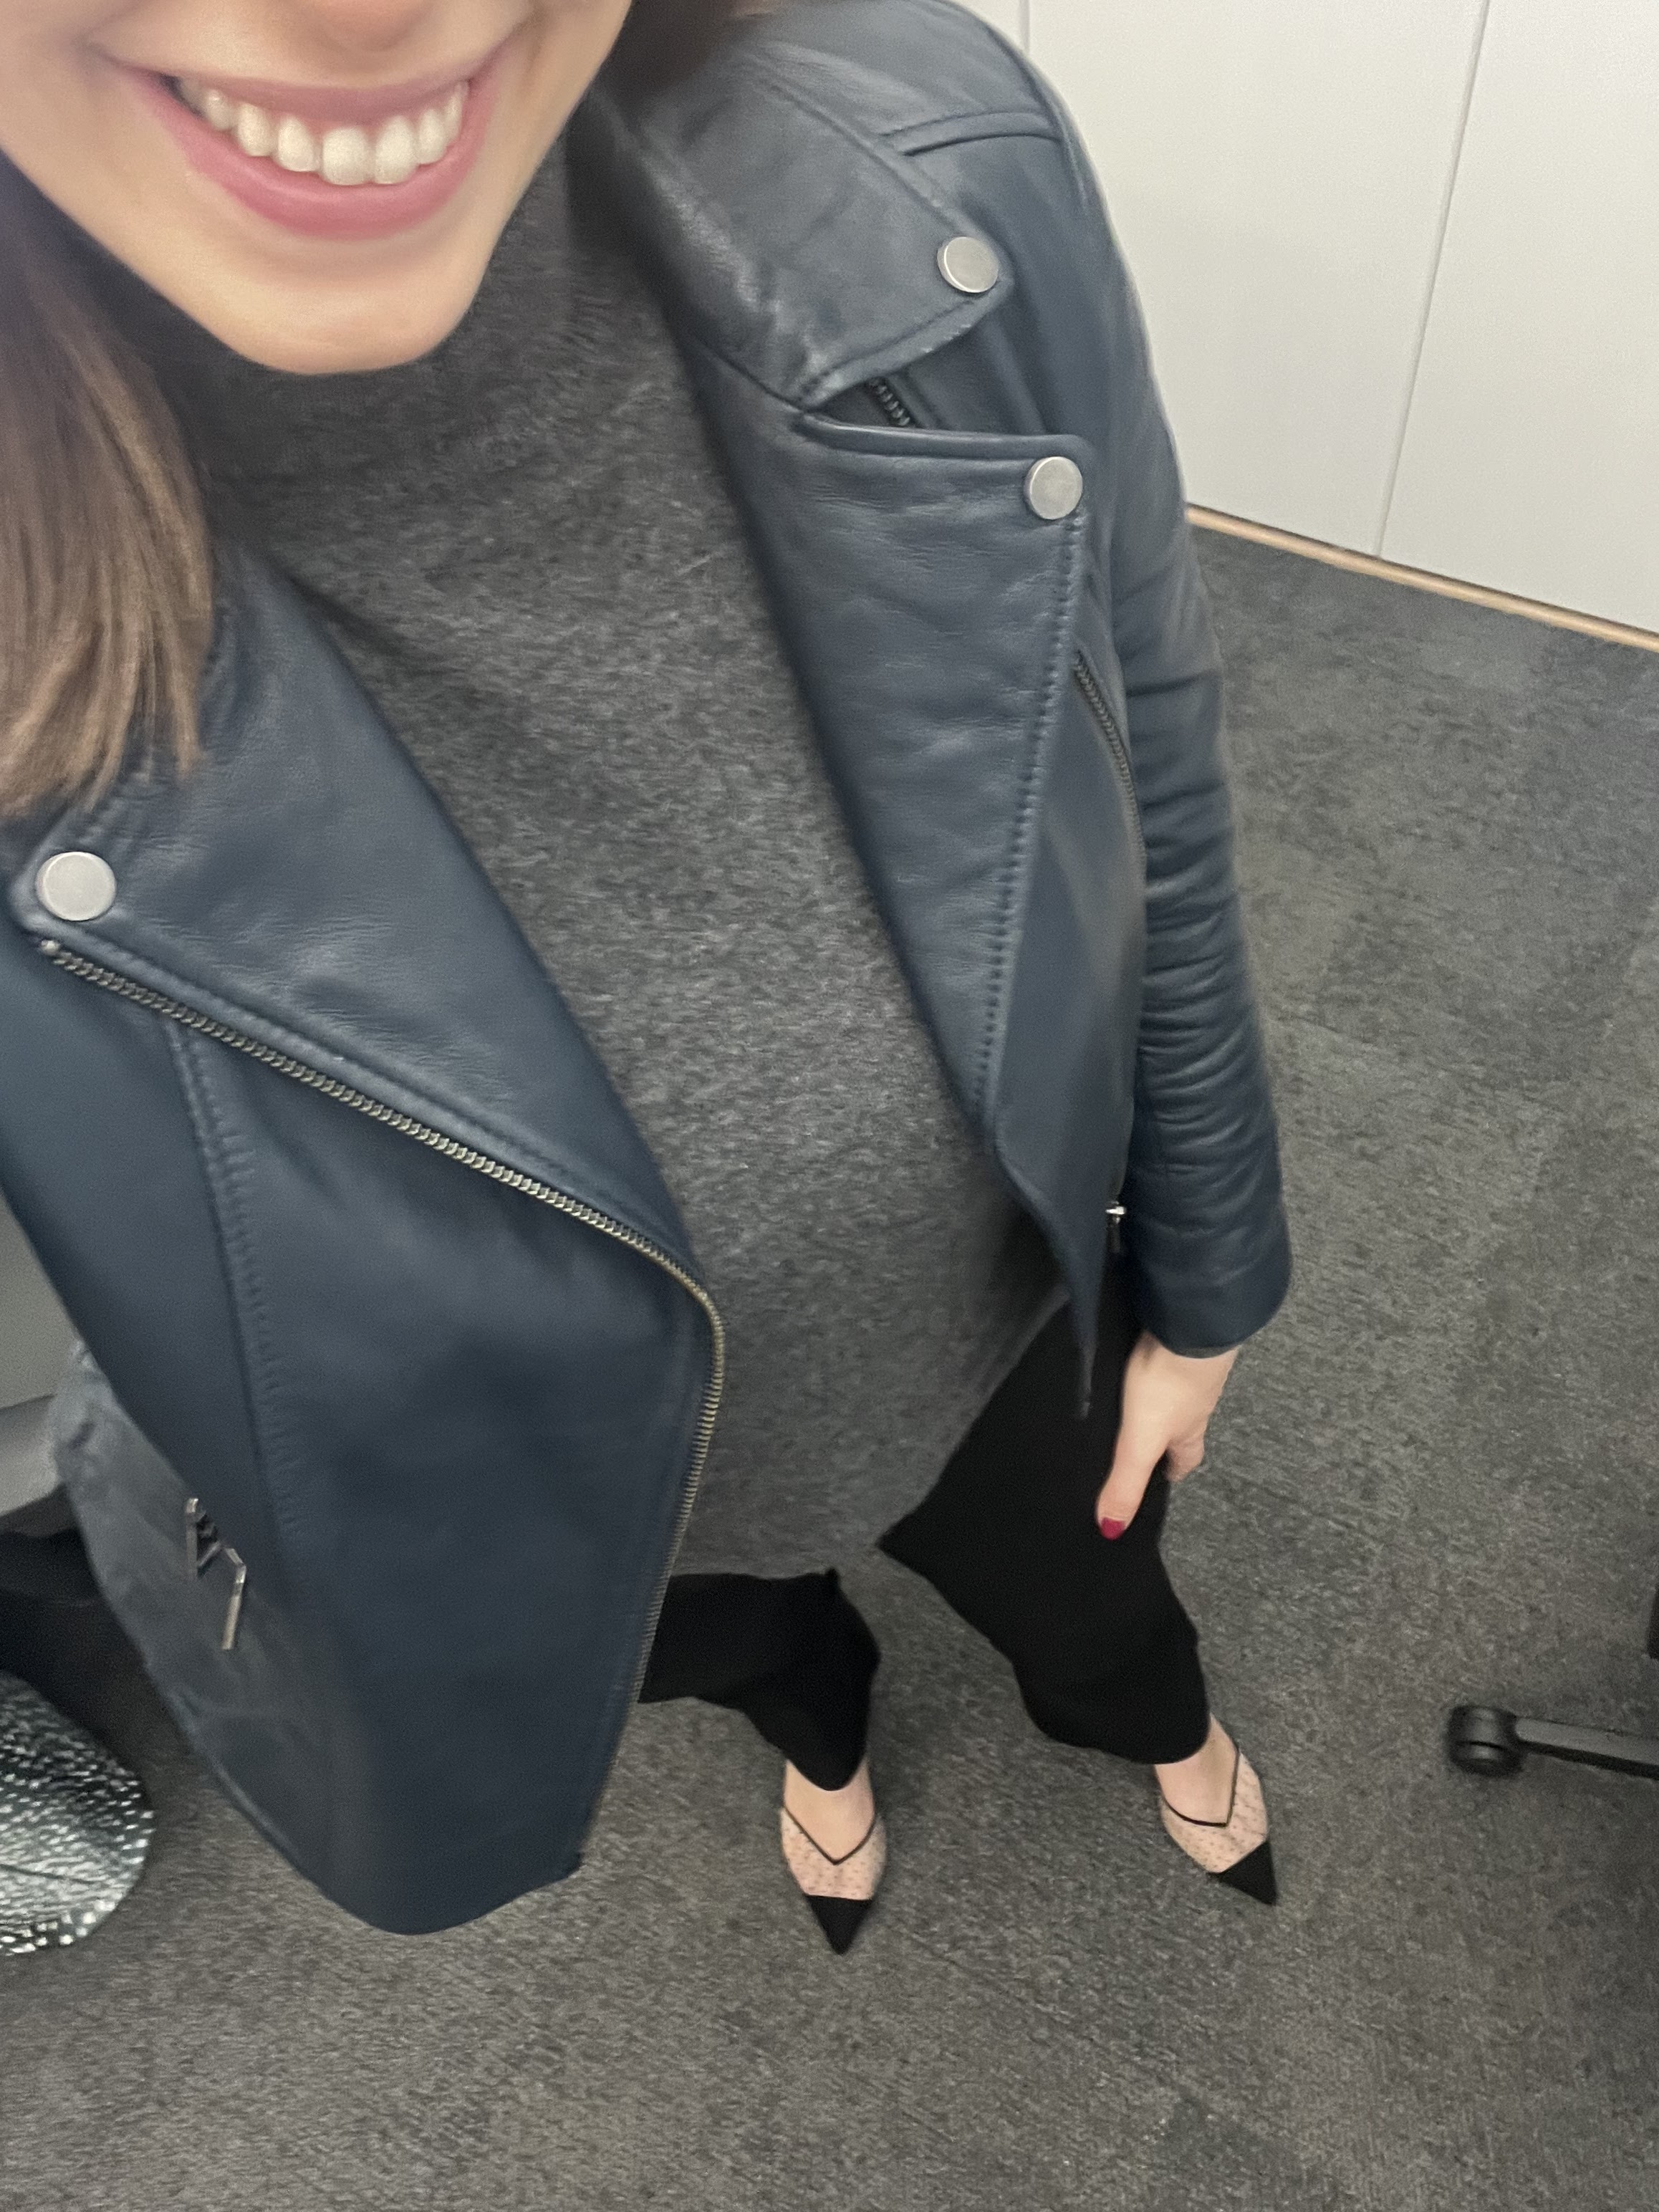 workwear, winter workwear, office style, office outfit, professional outfit, professional clothes, business causal, office style, workwear, winter workwear, law firm, suiting, sarah flint